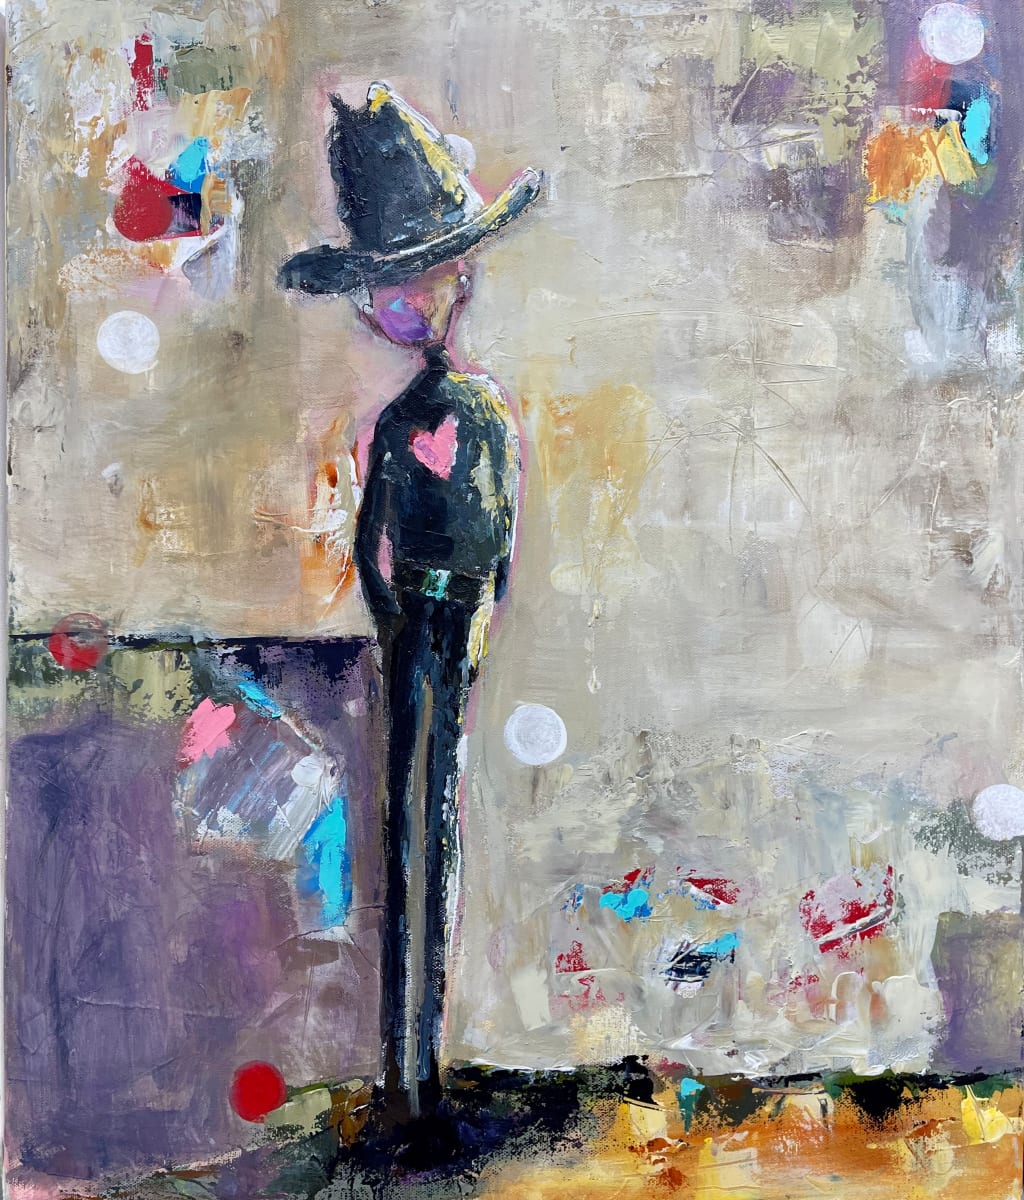 Looking for Love by Janetta Smith  Image: Skinny Cowboy New West Series - Janetta Smith